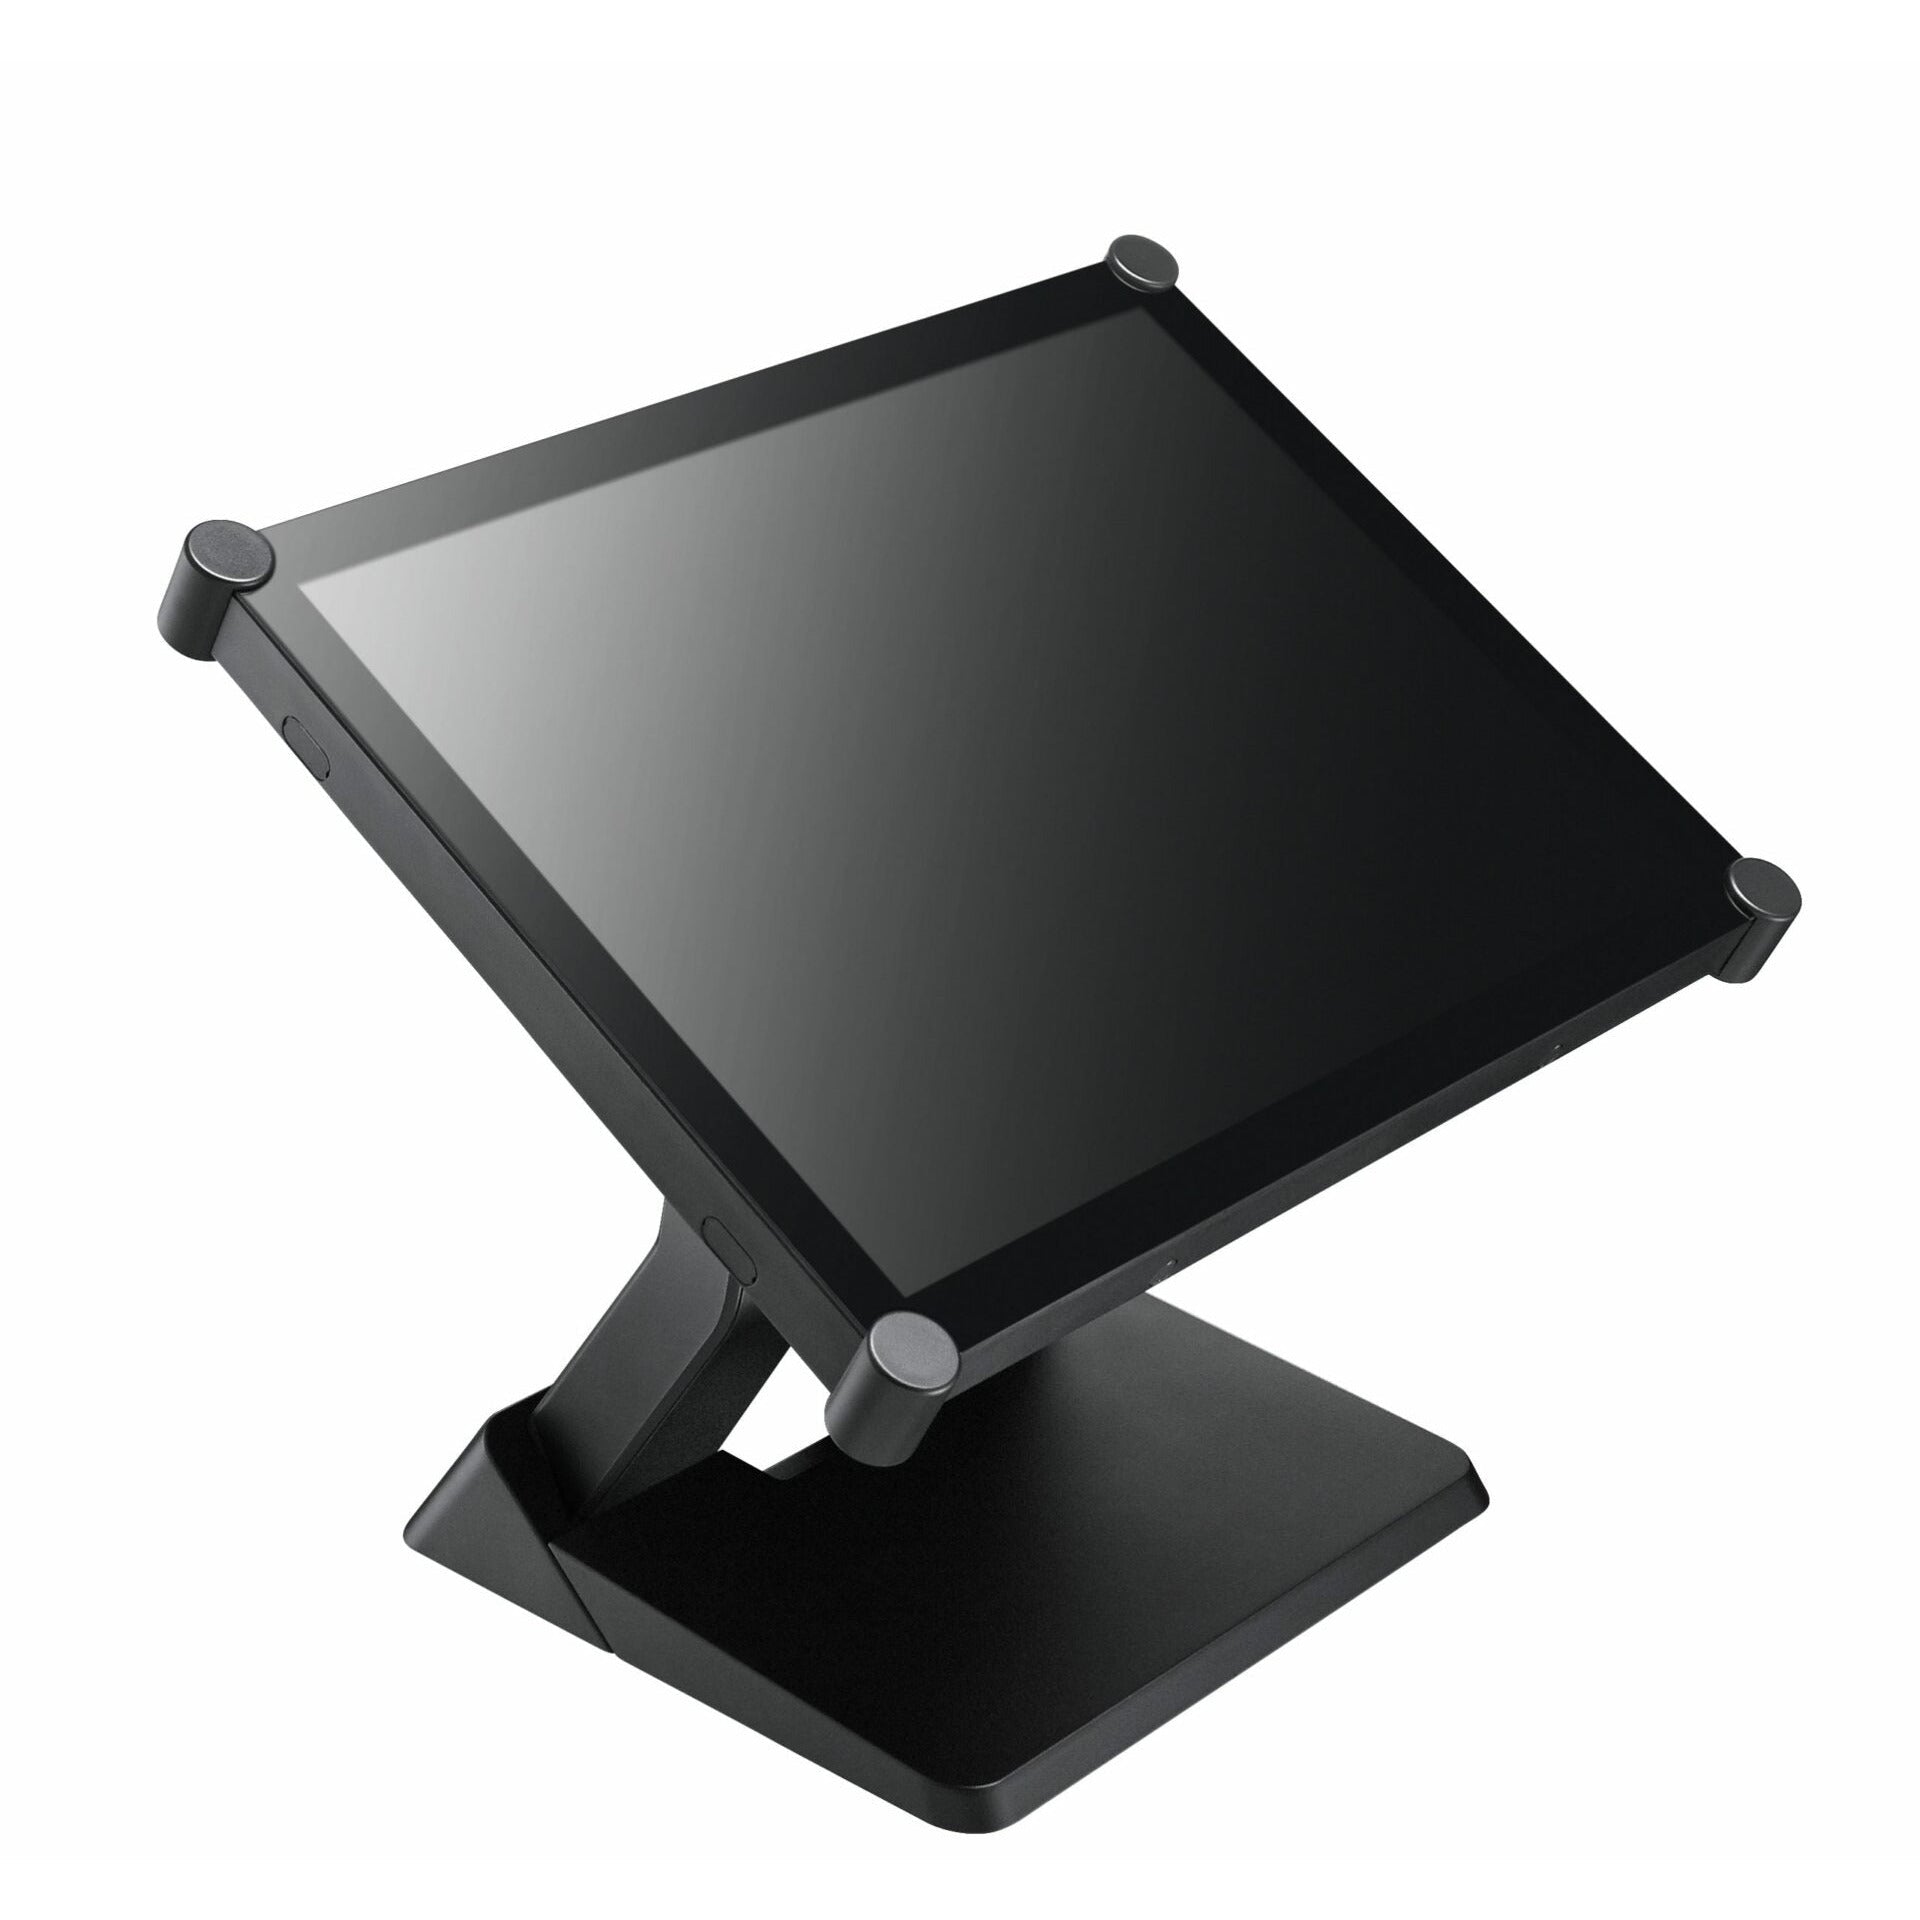 Dark Slate Gray AG Neovo TX-1502 15-Inch Touch Screen Monitor With Metal Casing